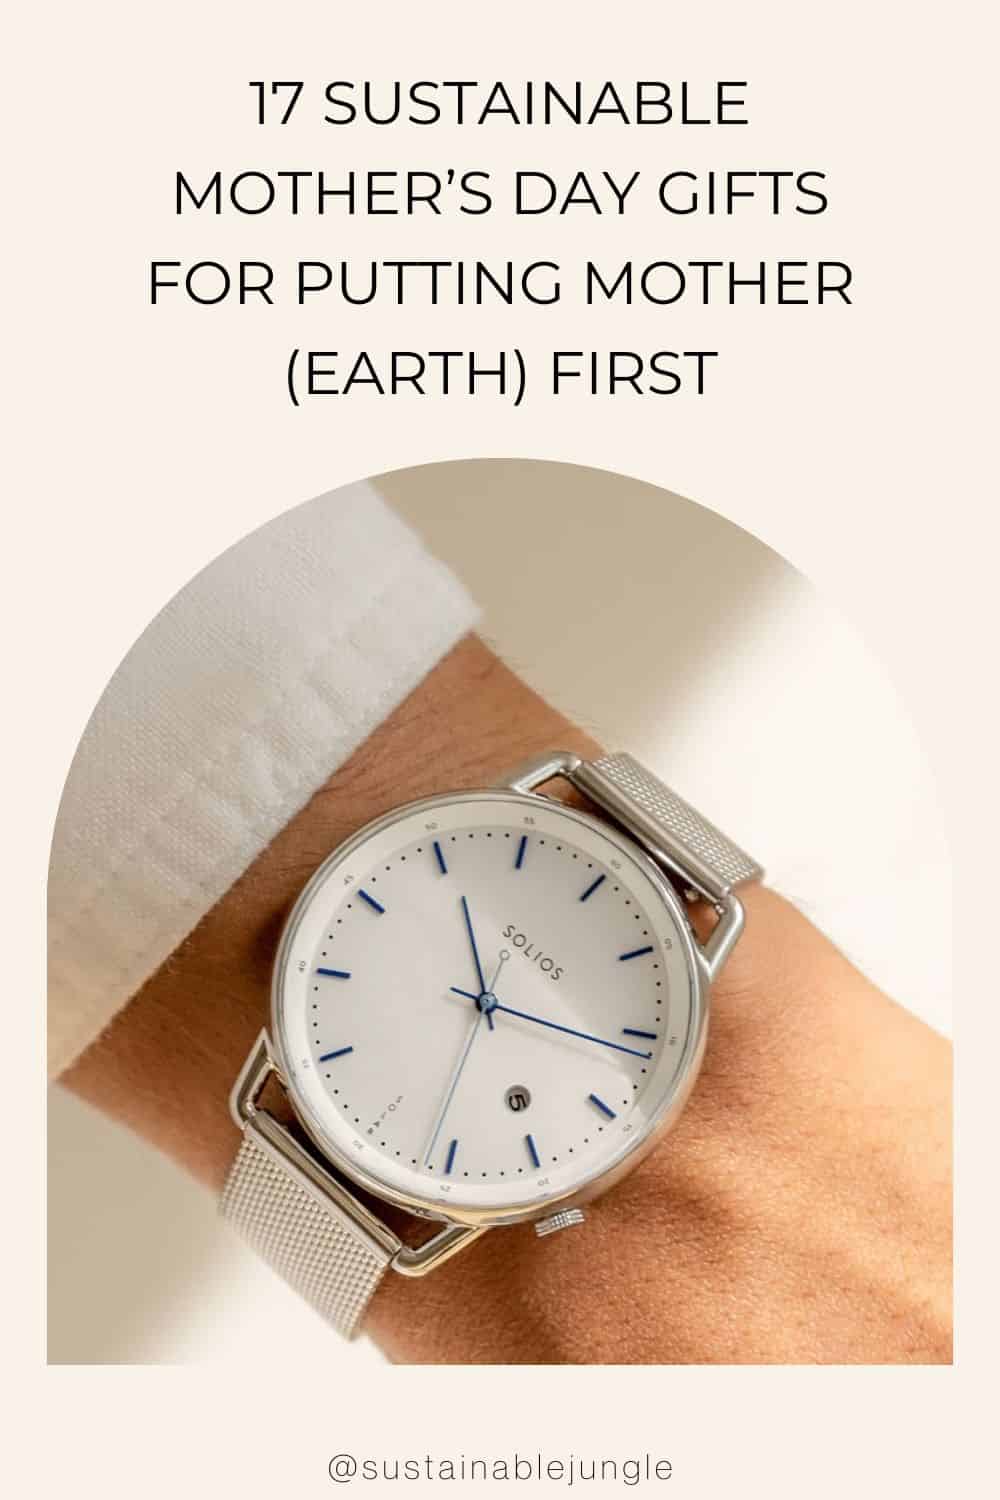 17 Sustainable Mother’s Day Gifts For Putting Mother (Earth) First Image by Solios #sustainablemothersdaygifts #sustainablegiftsformom #sustainablegiftsformothersday #ecofriendlymothersdaygifts #bestecofriendlymothersdaygifts #sustainablejungle